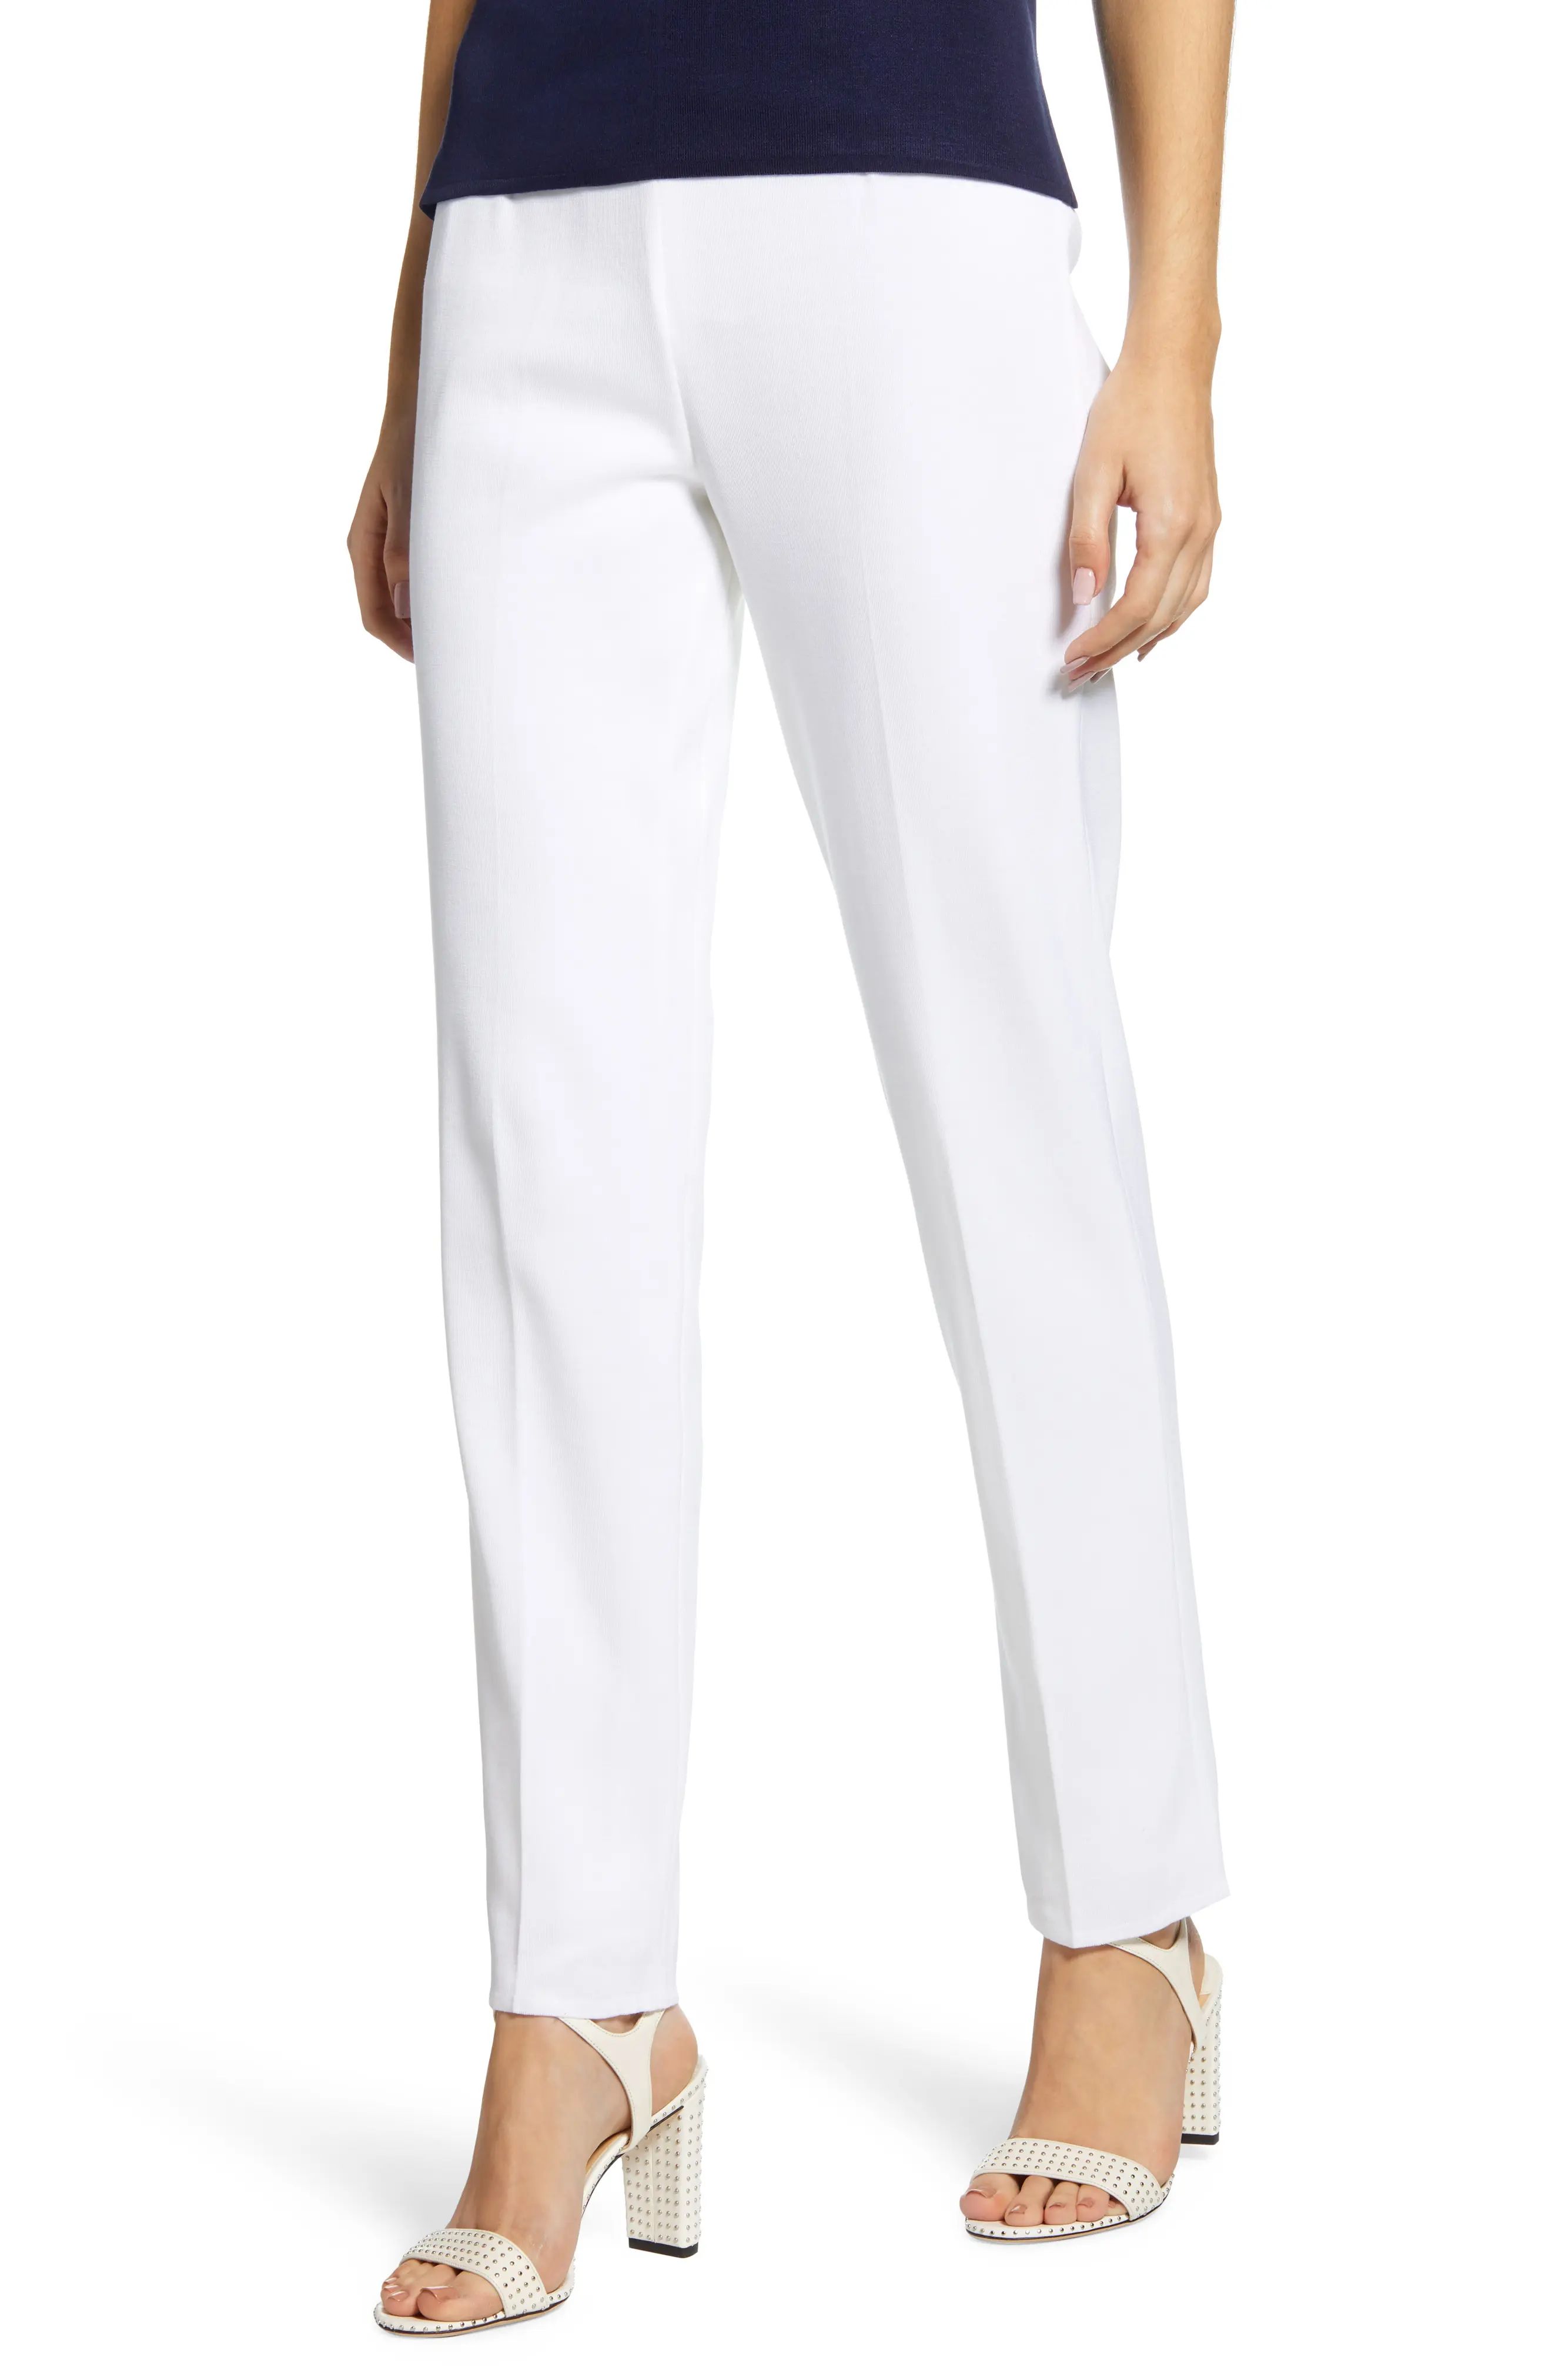 Ming Wang Straight Leg Knit Pants in White at Nordstrom, Size X-Small | Nordstrom